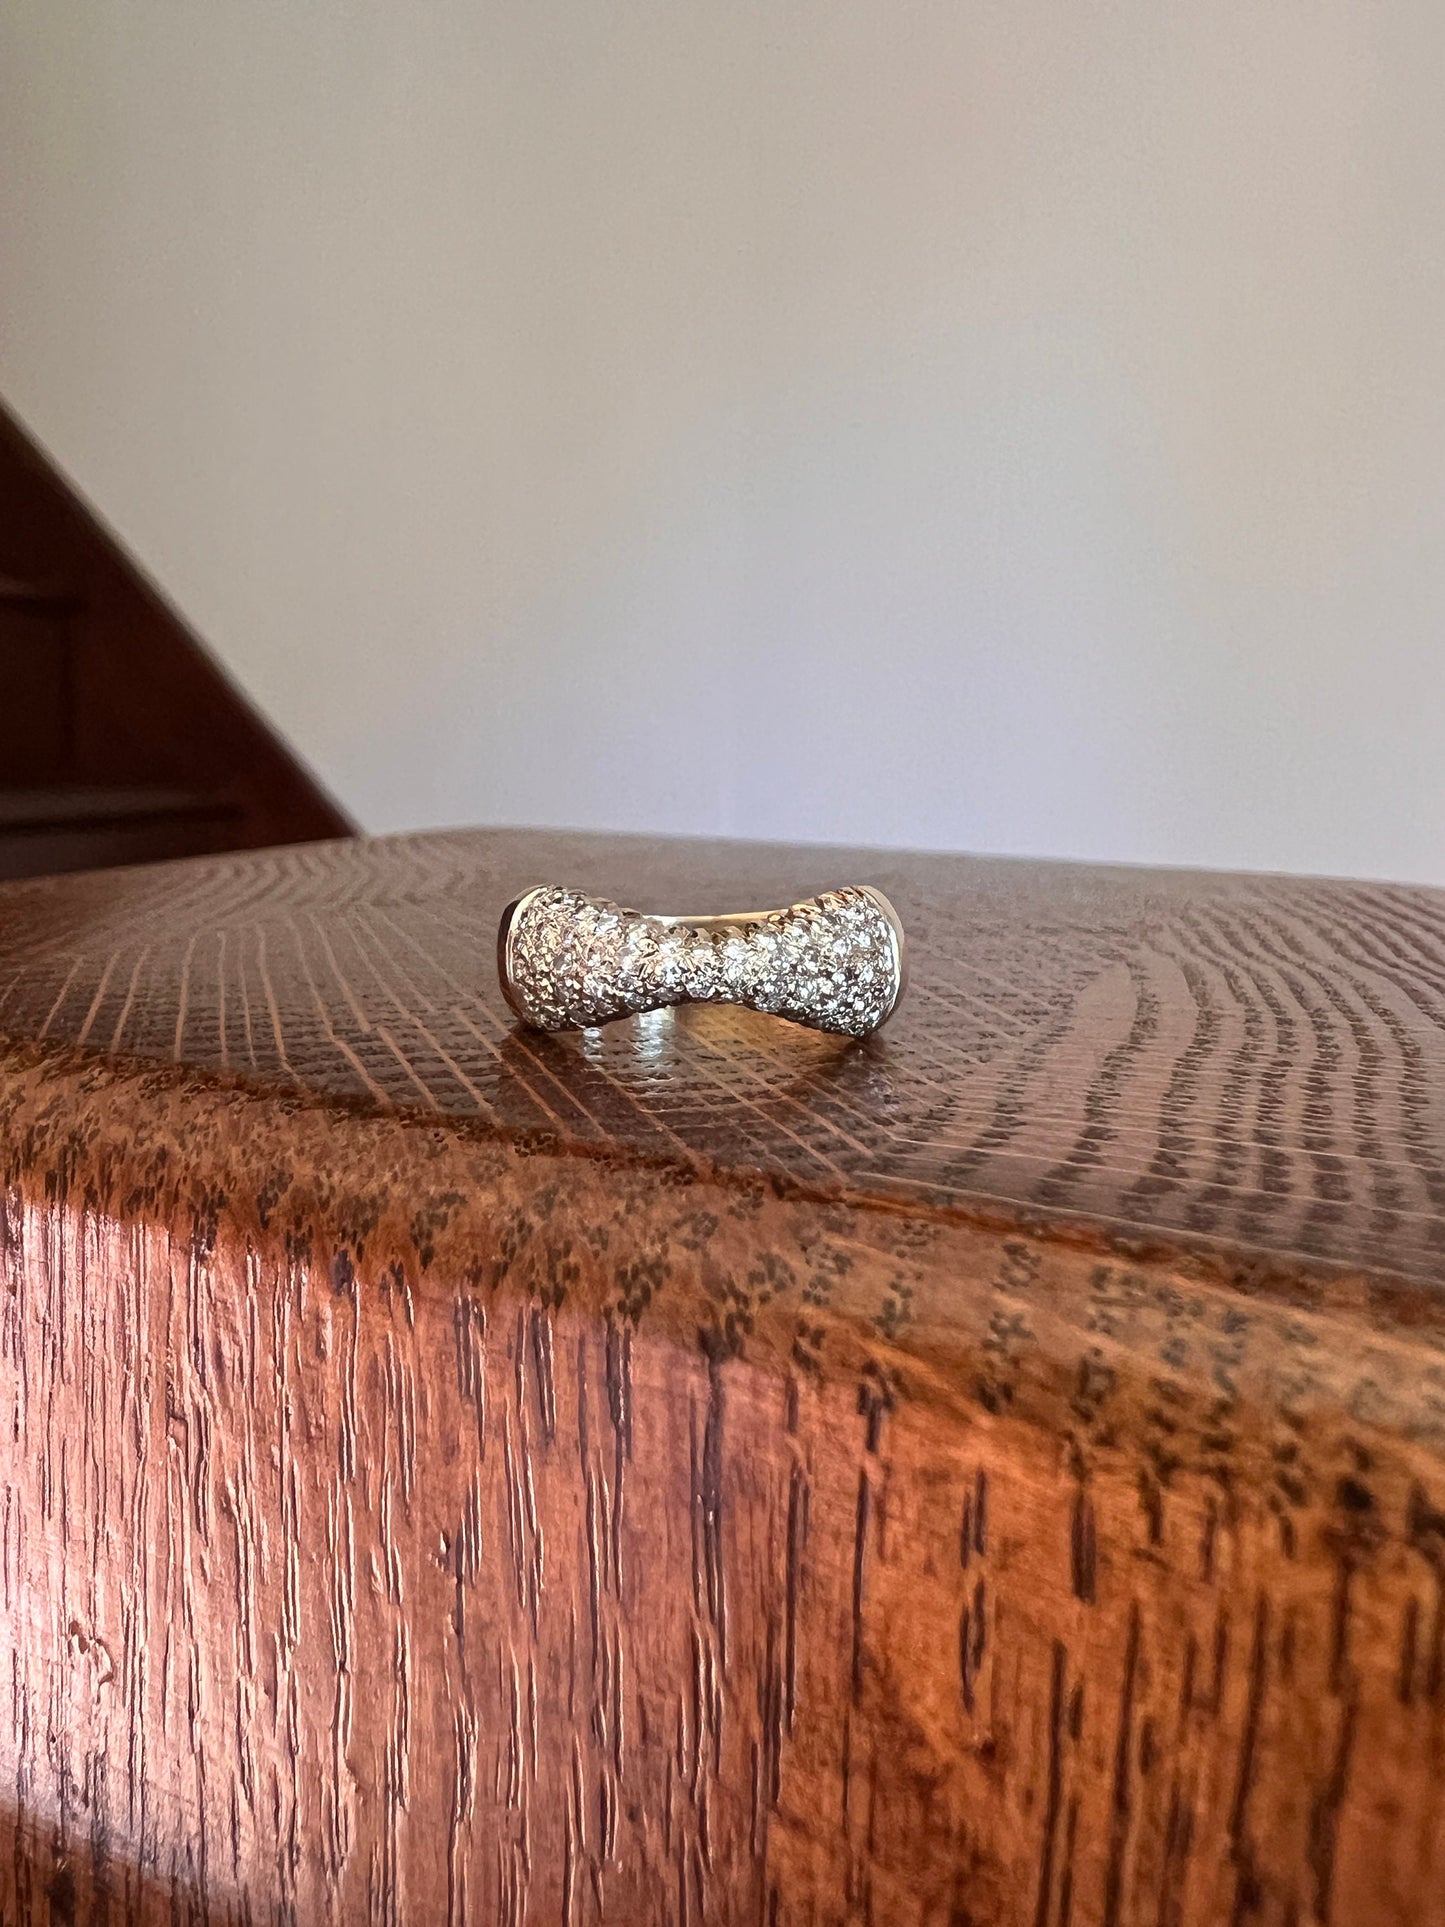 BOW Pave Encrusted Diamond Domed Stacker Ring Chunky Retro Vintage Wide Band 14k Gold Versatile Romantic Gift Timeless